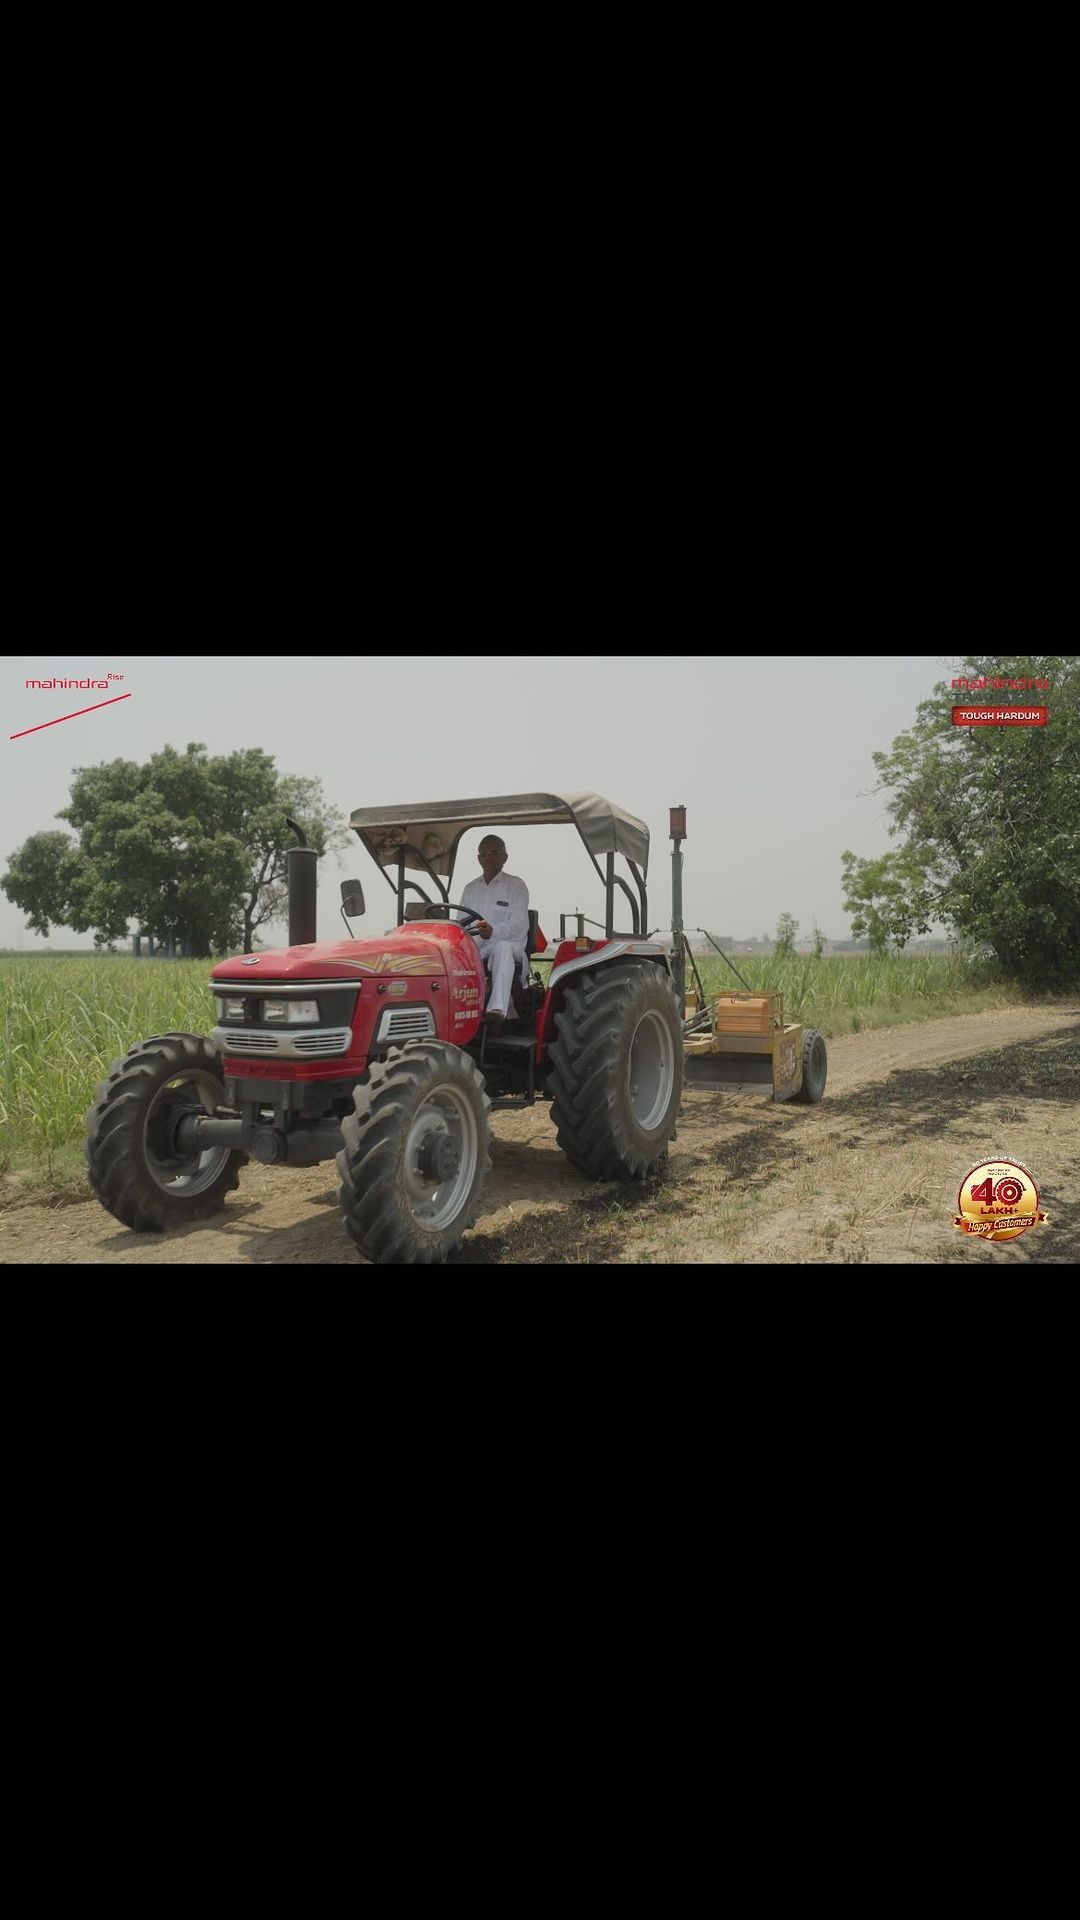 Experience the perfect blend of strength and efficiency with the Mahindra Arjun 605 DI MS! Comfort, mileage, and power p...